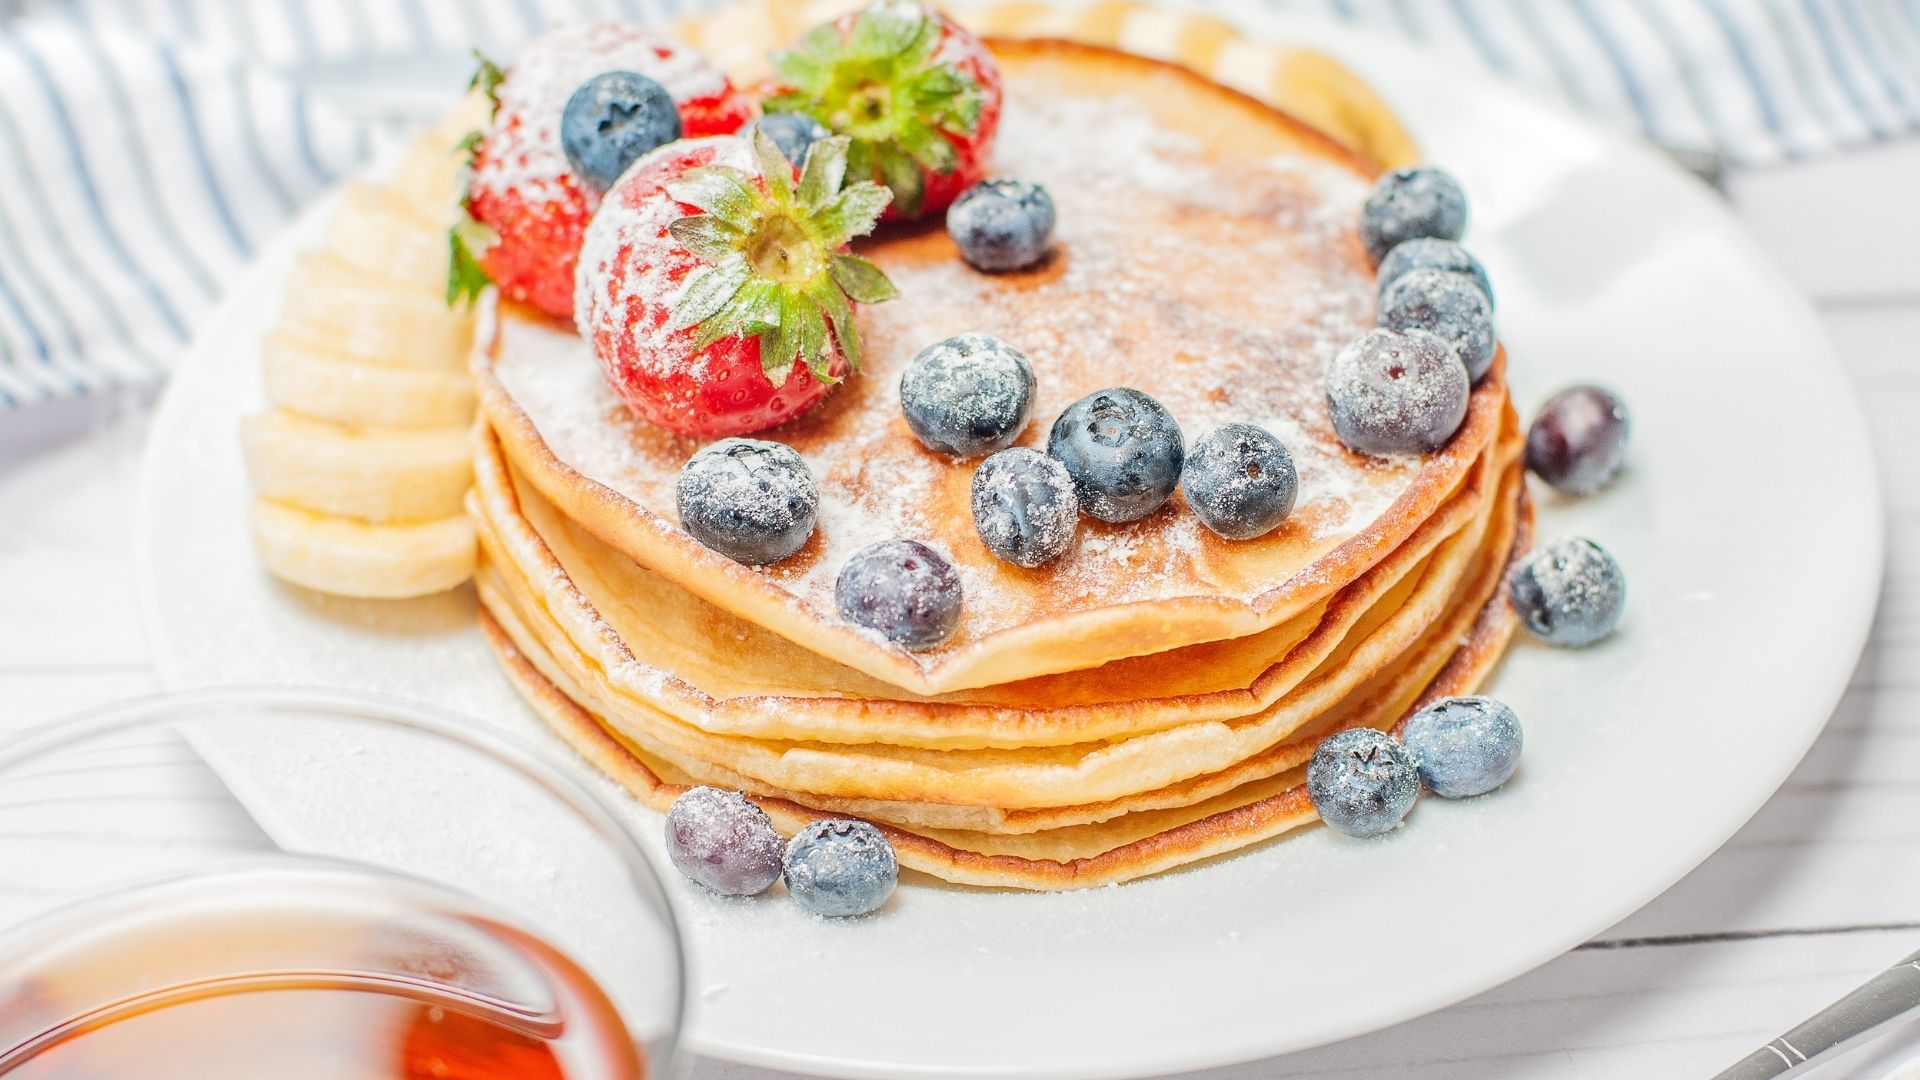 pancakes topped with berries and dusted with icing sugar